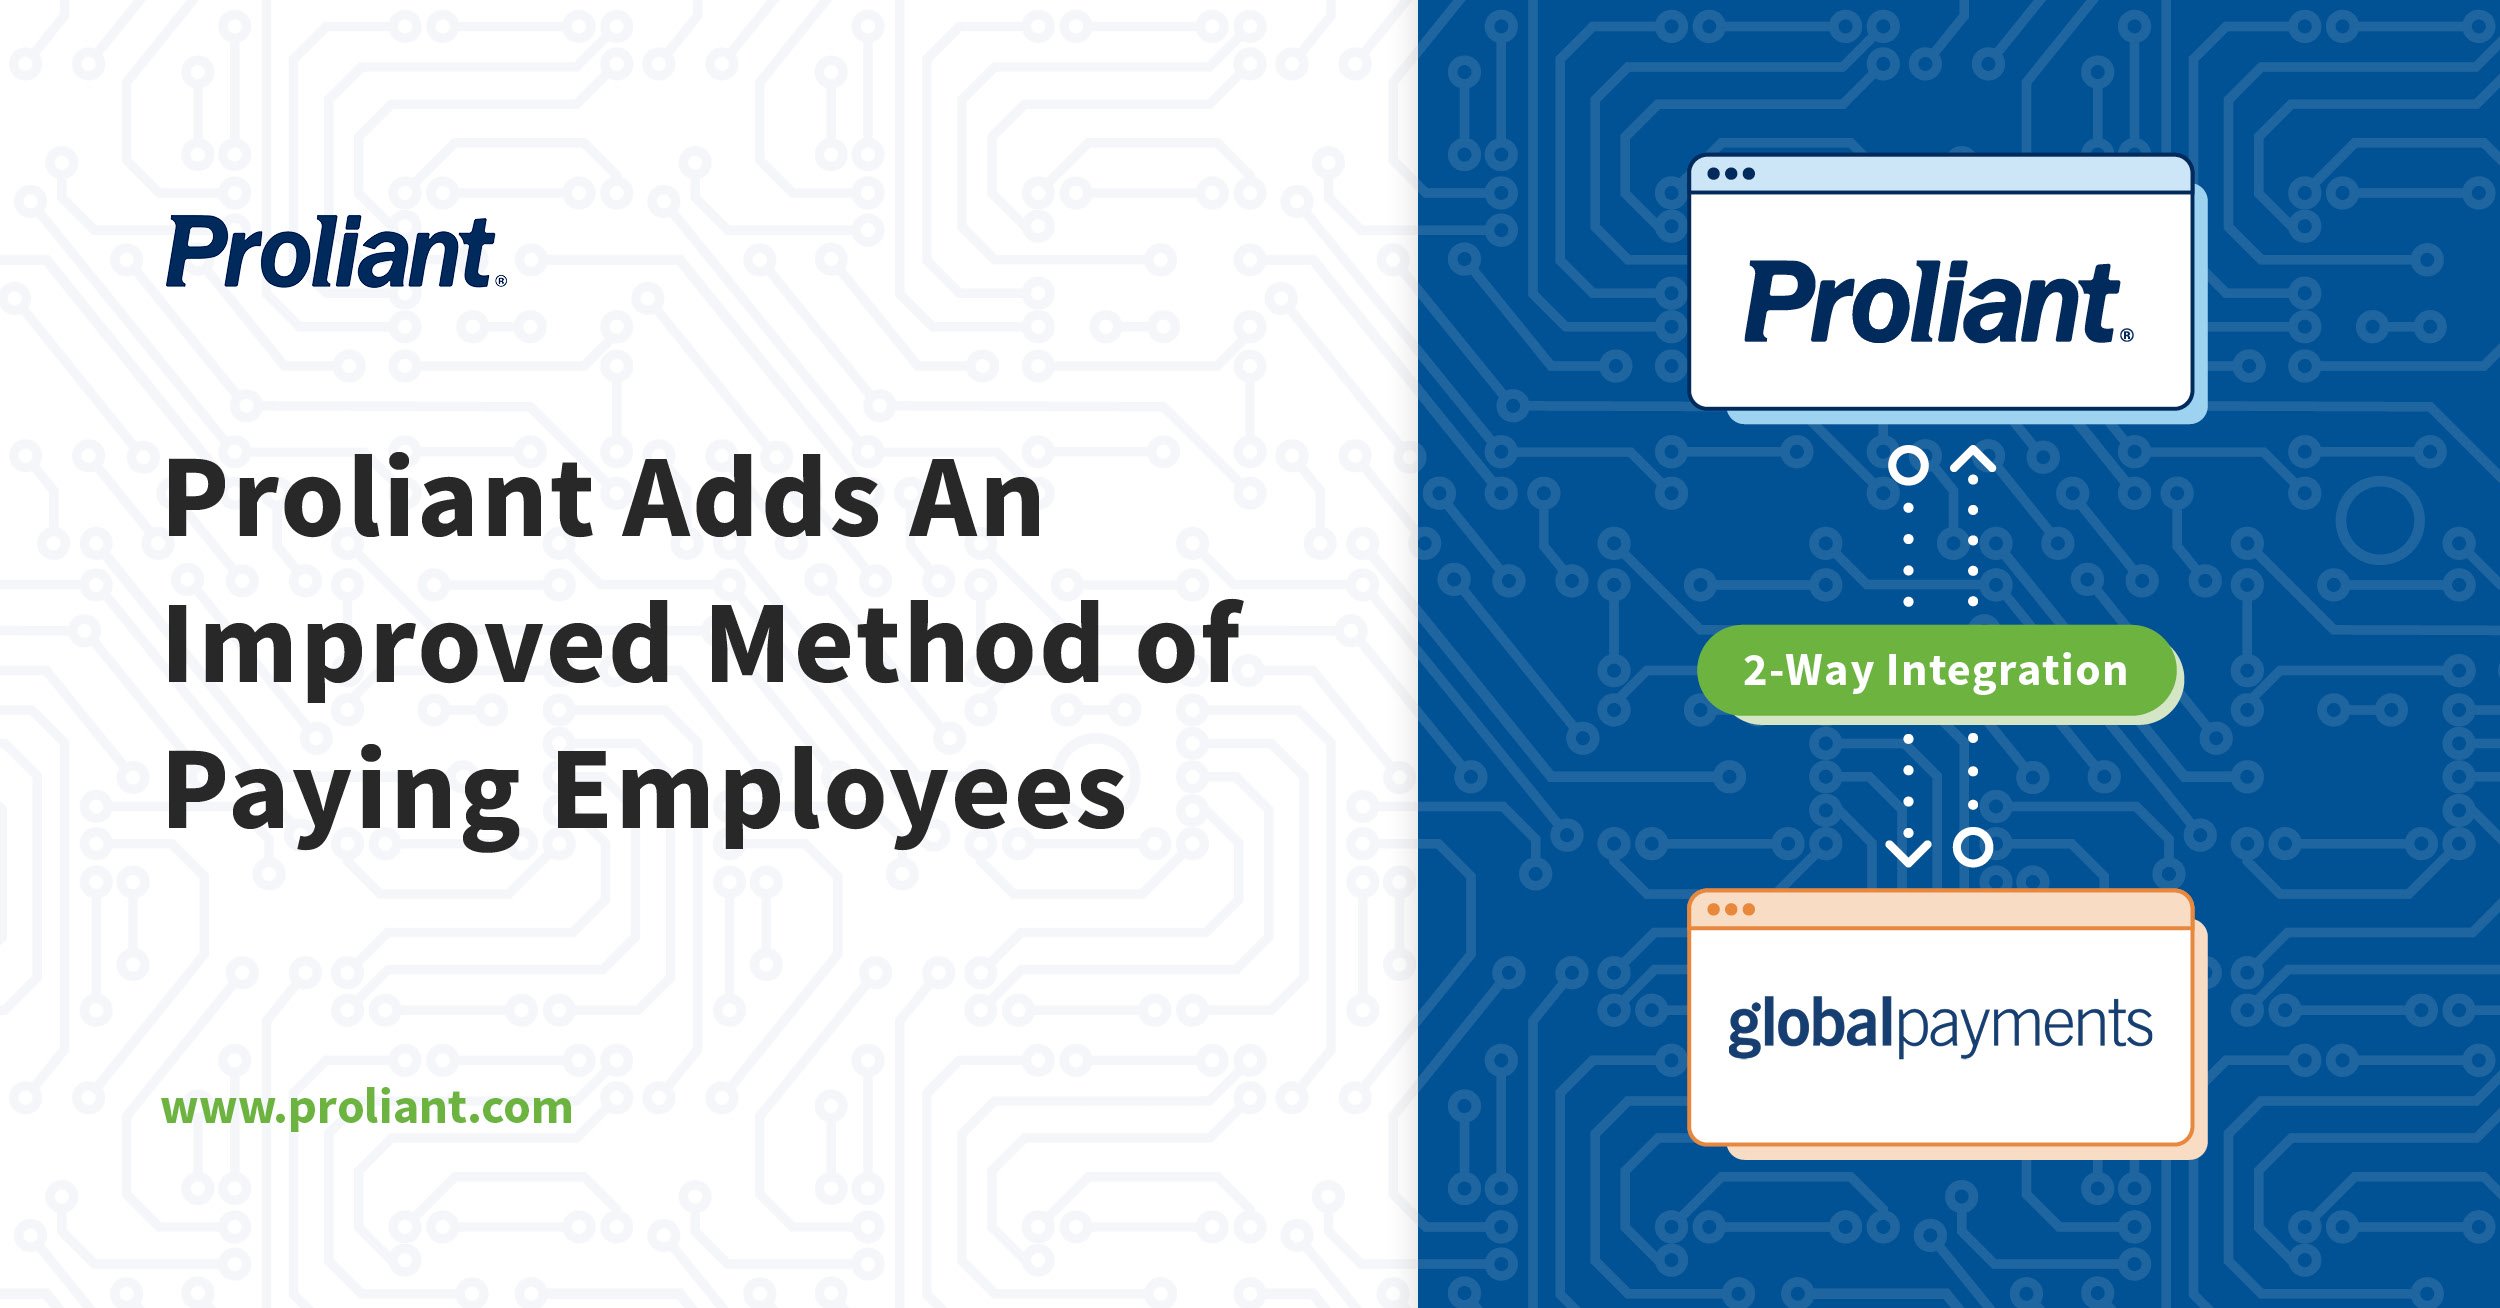 Proliant Adds An Improved Method of Paying Employees